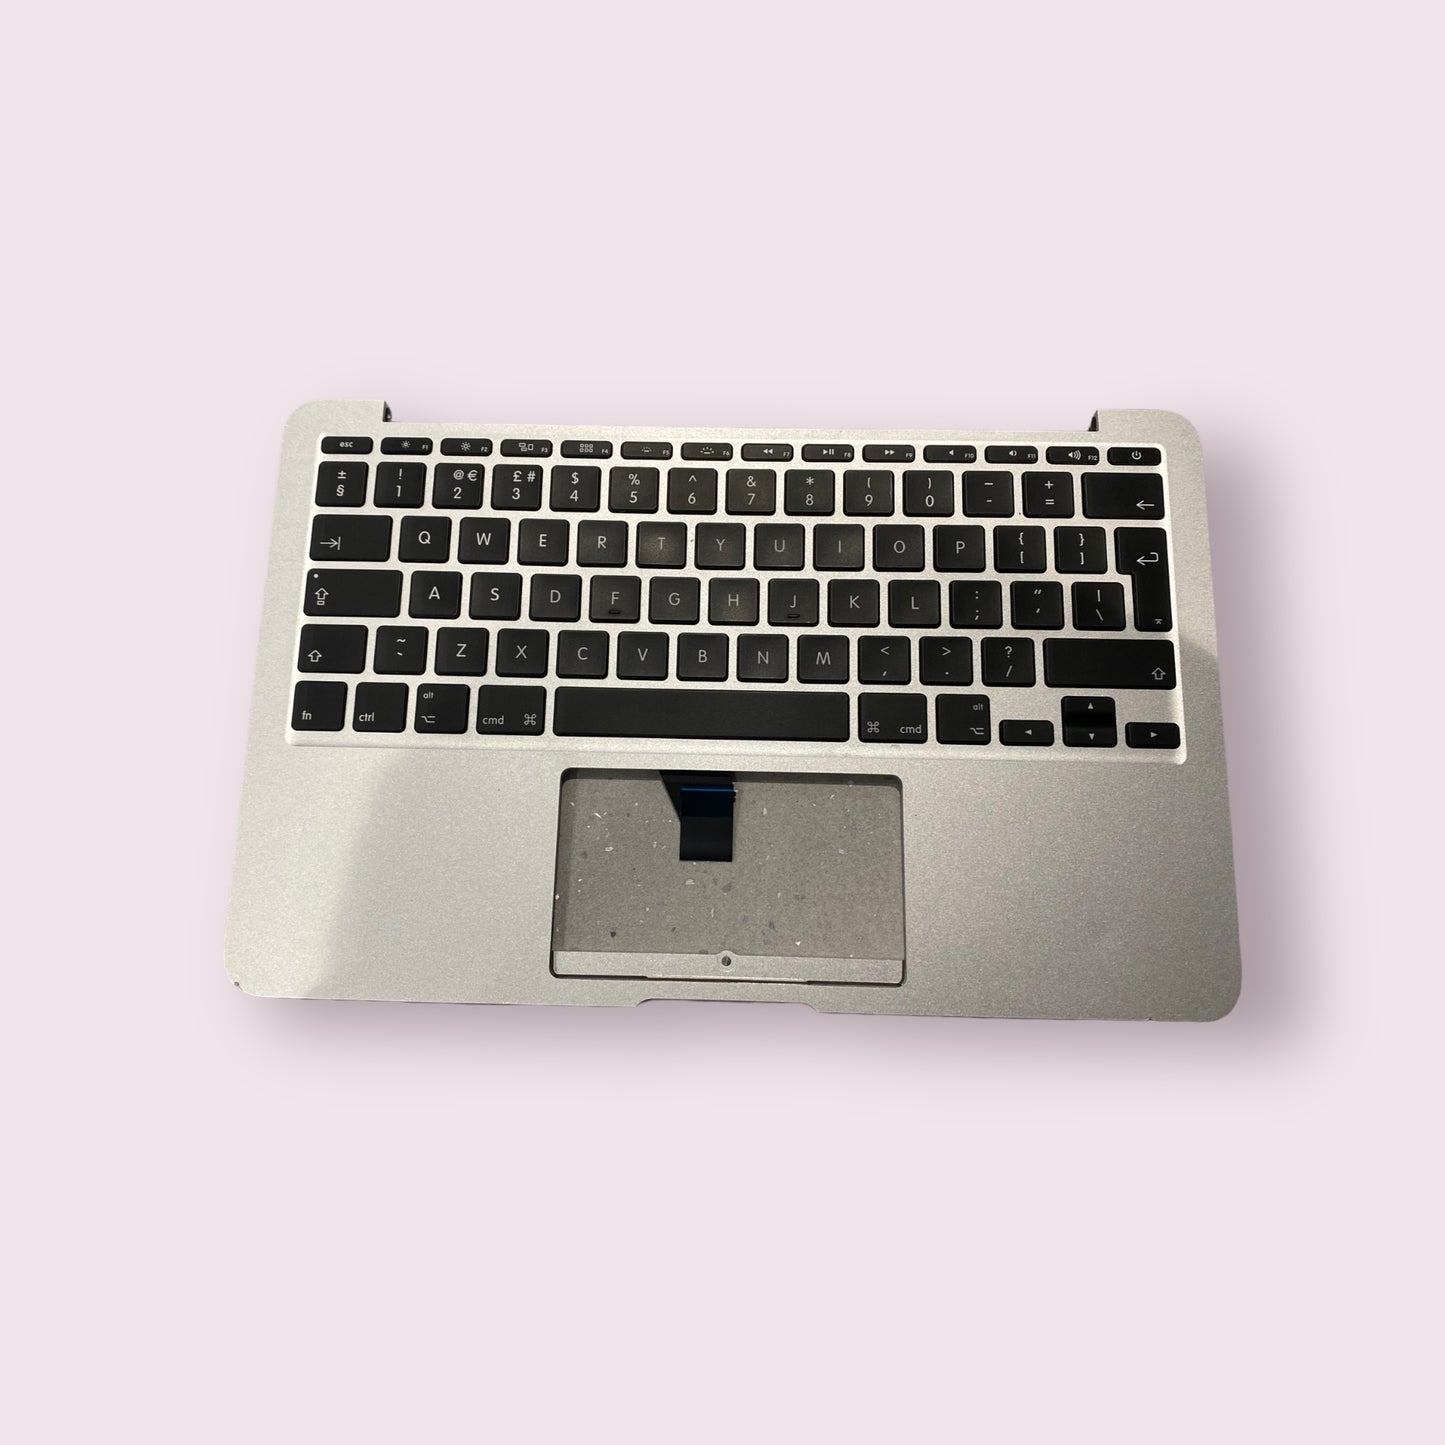 Macbook Air 11" A1465 2013 2015 2017 Palmrest Keyboard Assembly Palm rest - Silver - Genuine Pull Part